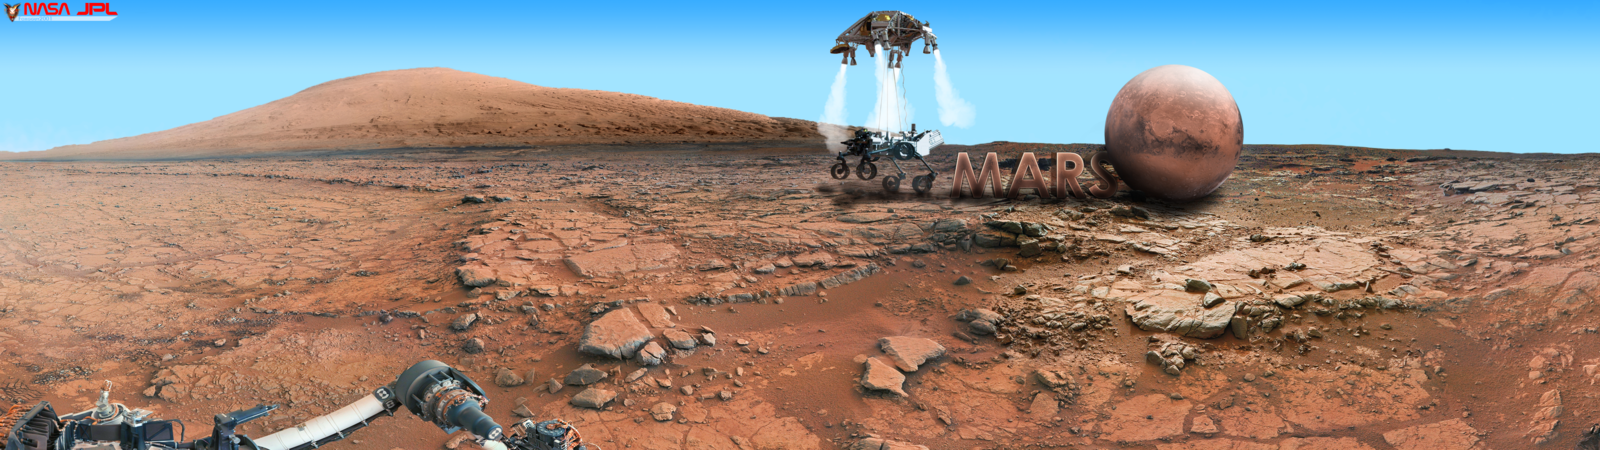 Mars Wallpaper Curiosity Rover Dual Monitor By Foxgguy2001 On